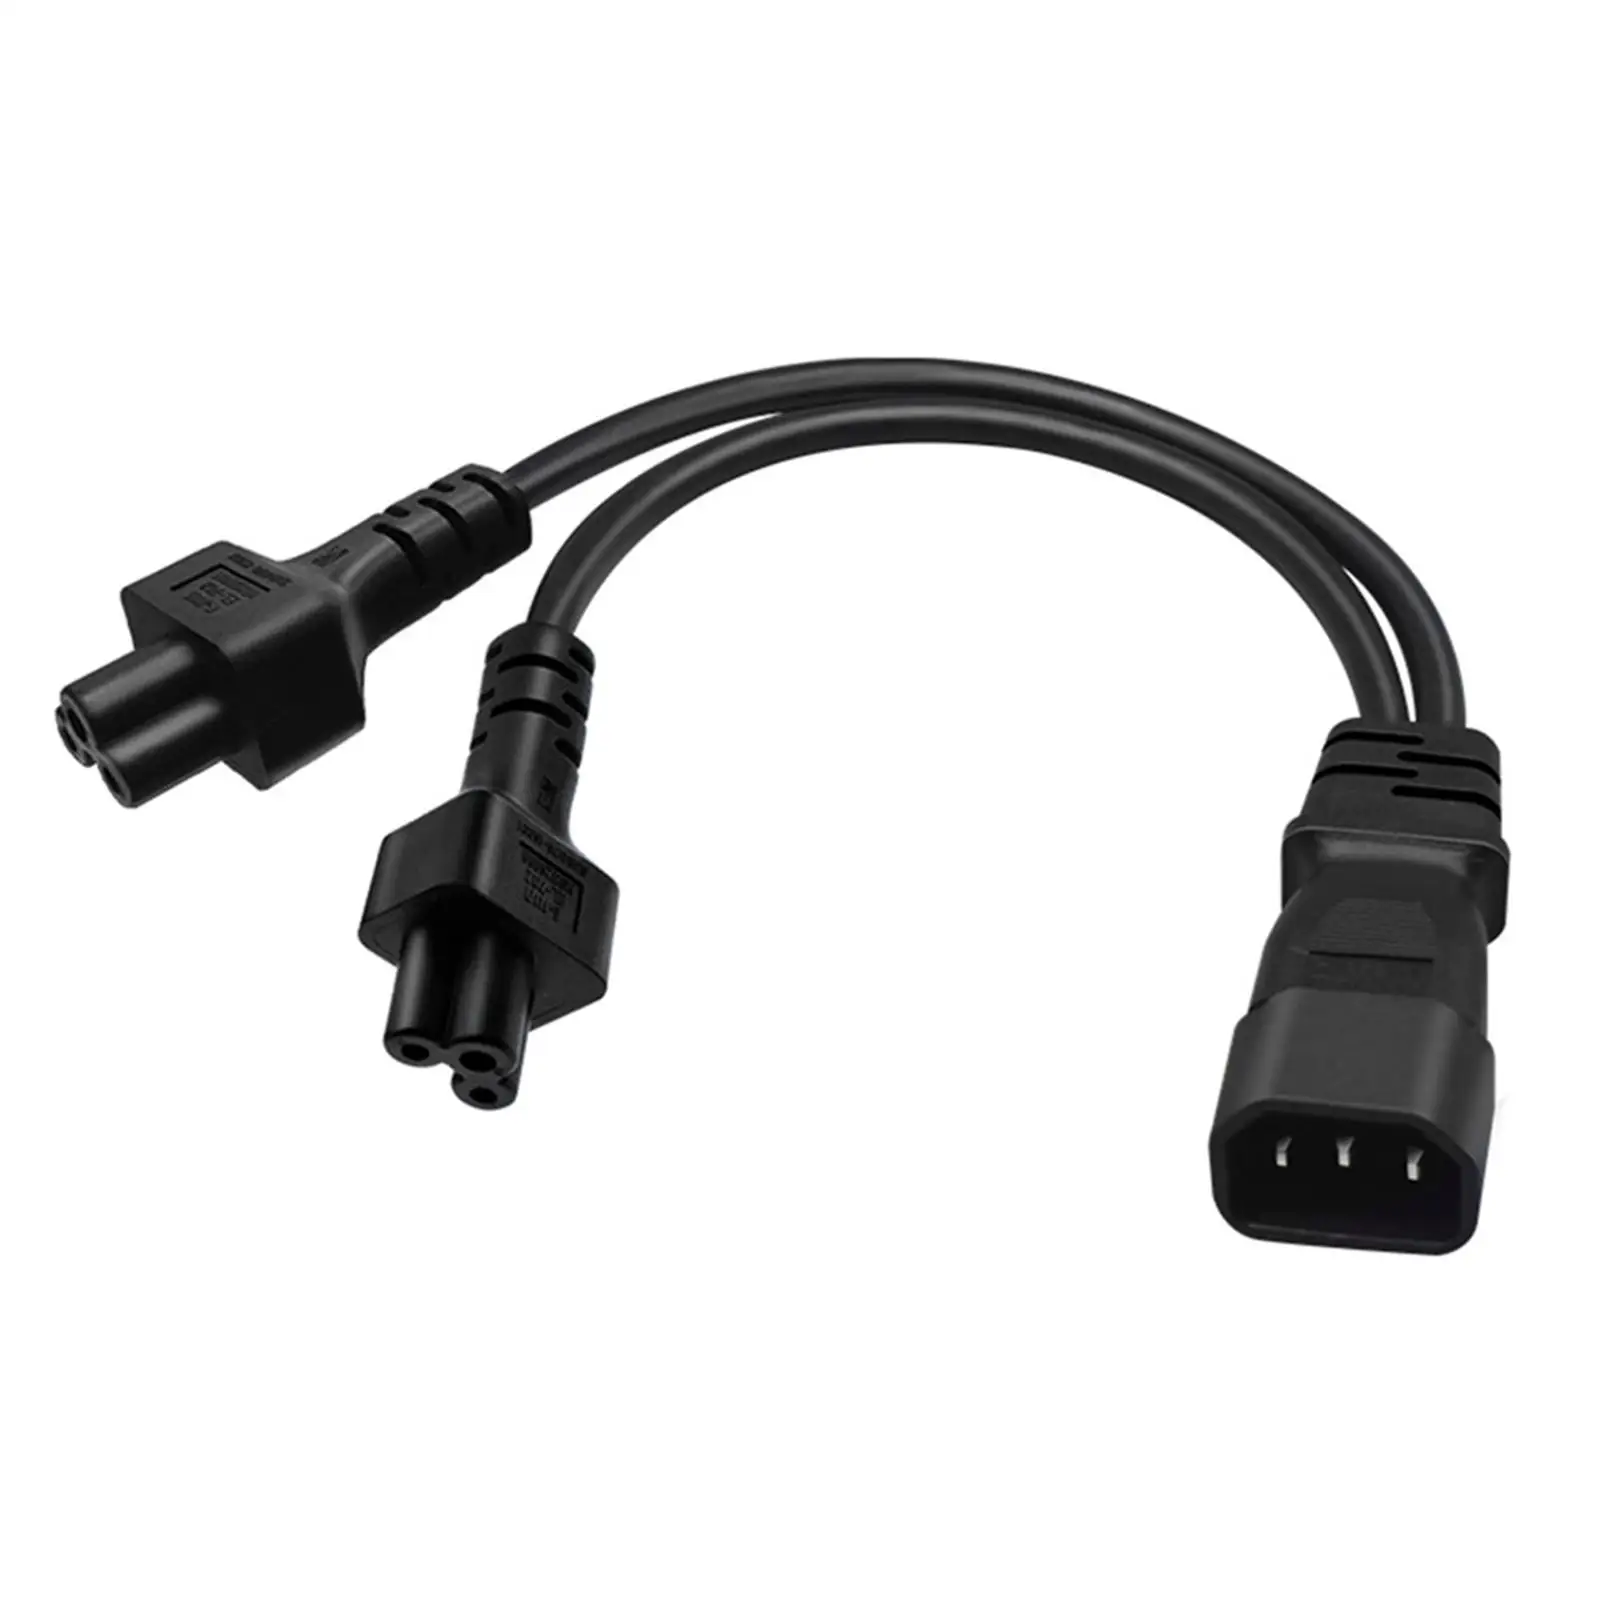 IEC320-C14 to IEC320 Dual C5 Splitter Power Cable Replace Part Durable Power Cable Cord Splitter for Monitor computers Computer